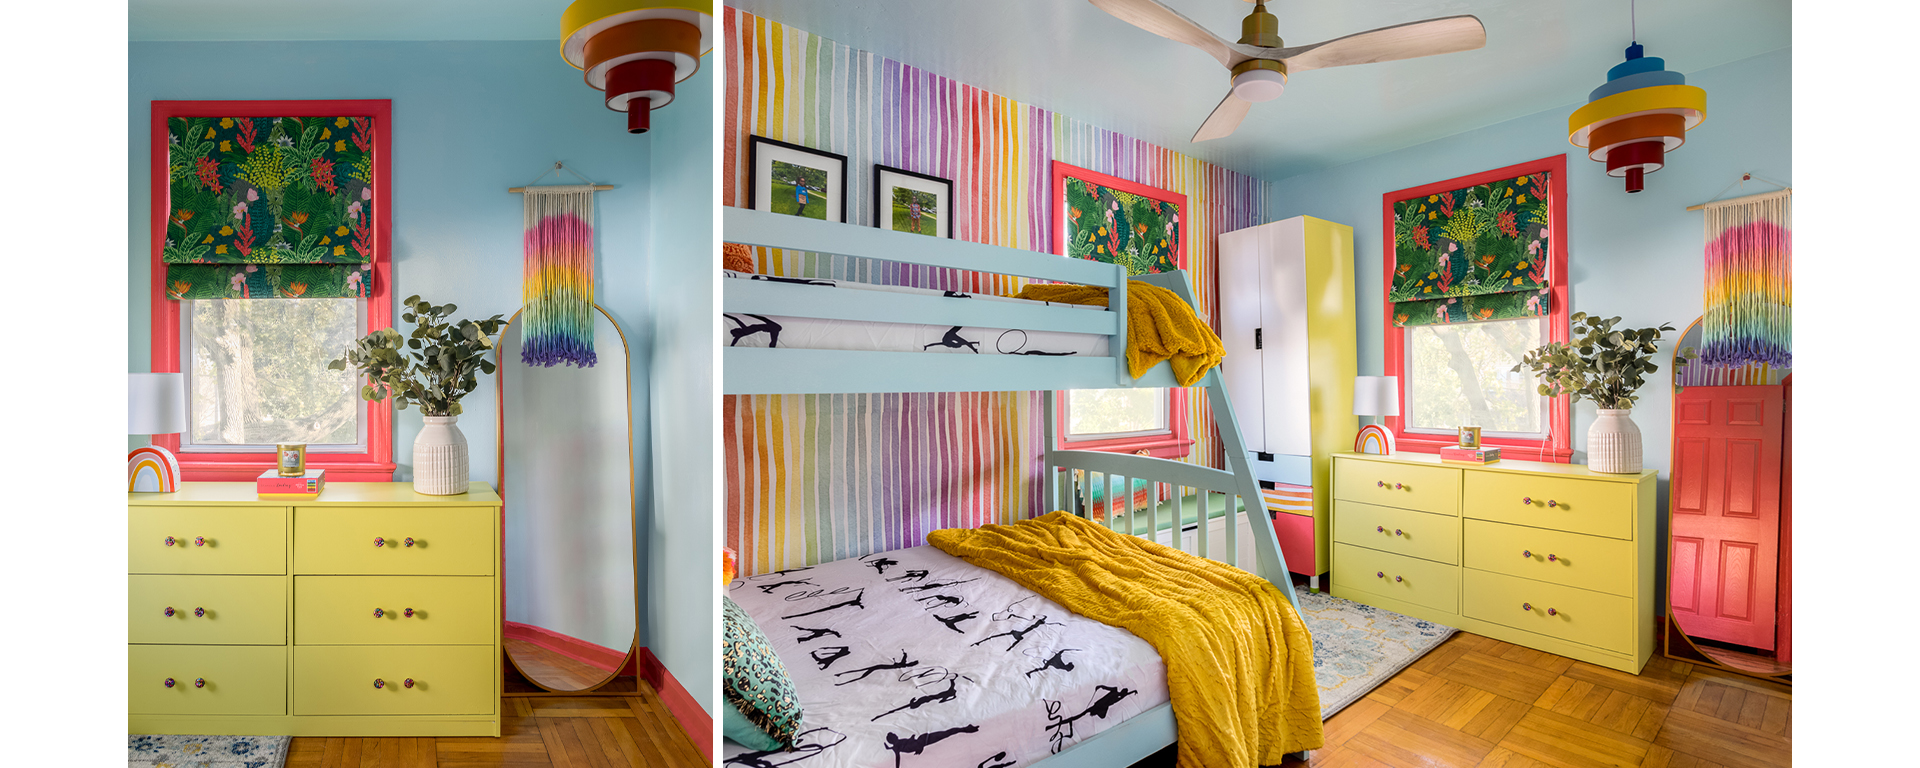 A colorful child’s room with light blue walls and bunk bed, yellow-green dresser and wardrobe, rainbow accent wall and details, and wood floor.